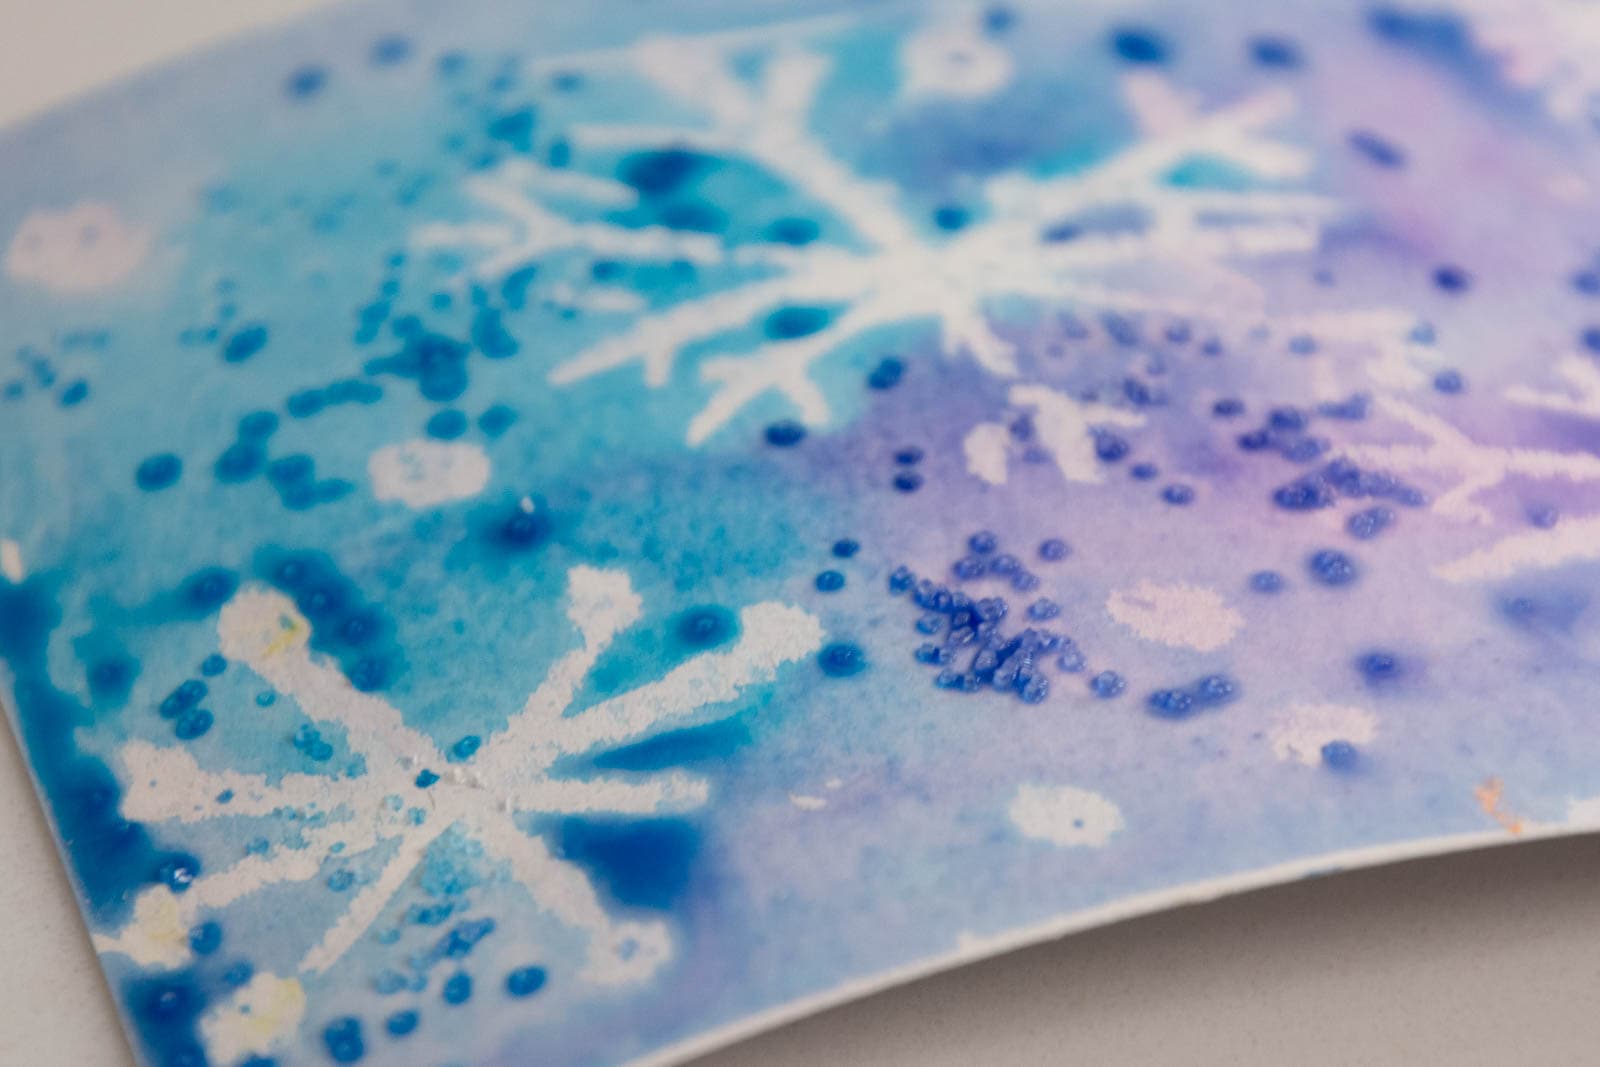 salt on watercolor painting with white snowflakes.